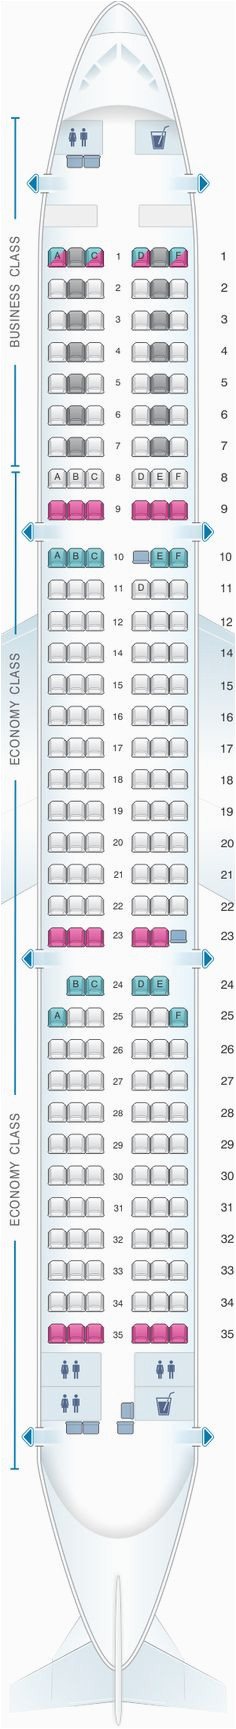 Airbus A321 Jet Seating Chart